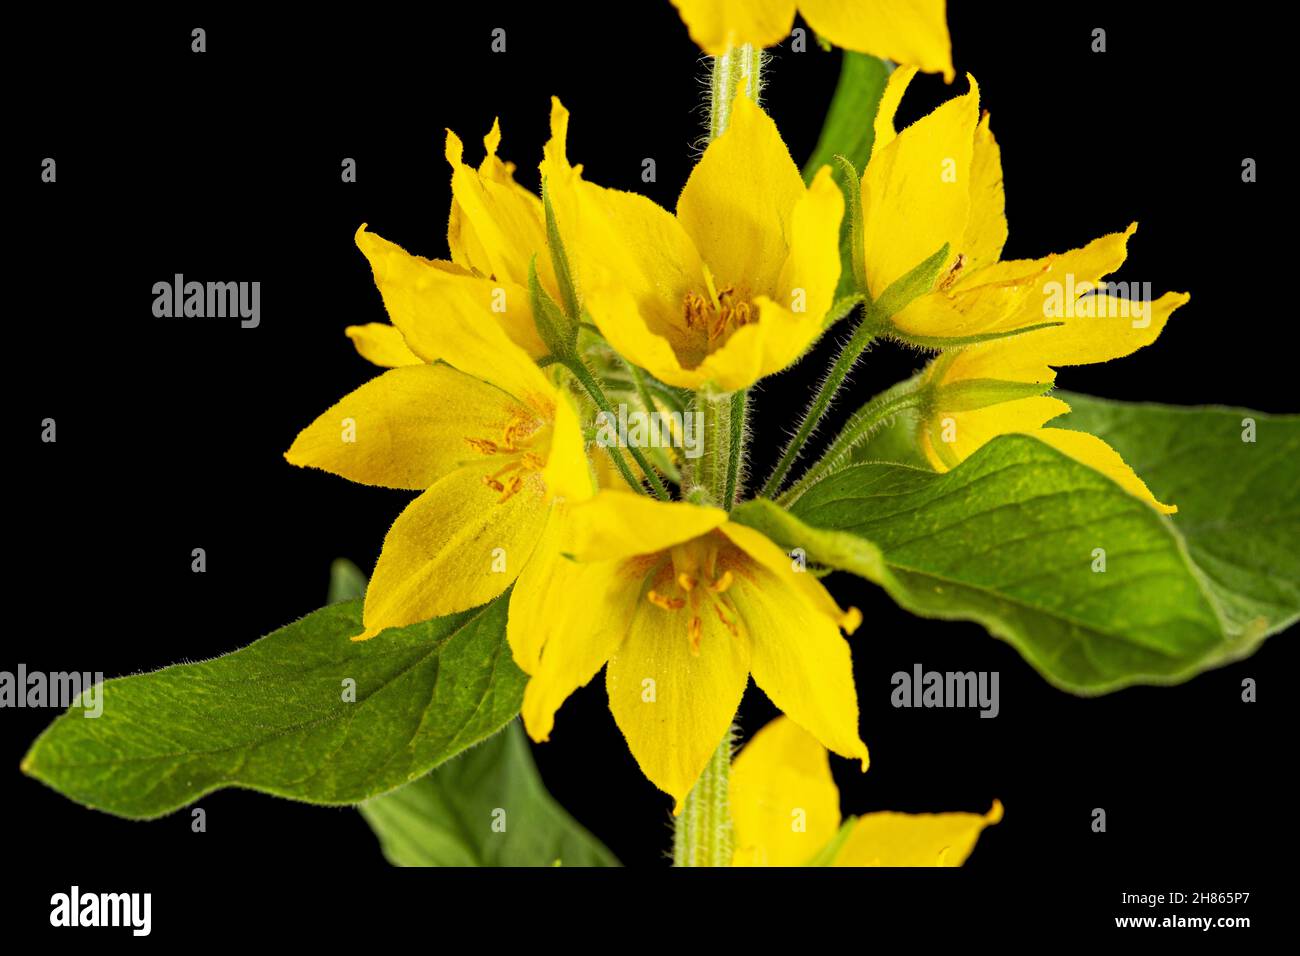 Inflorescence of yellow loosestrife flowers, lat. Lysimachia, isolated on black background Stock Photo